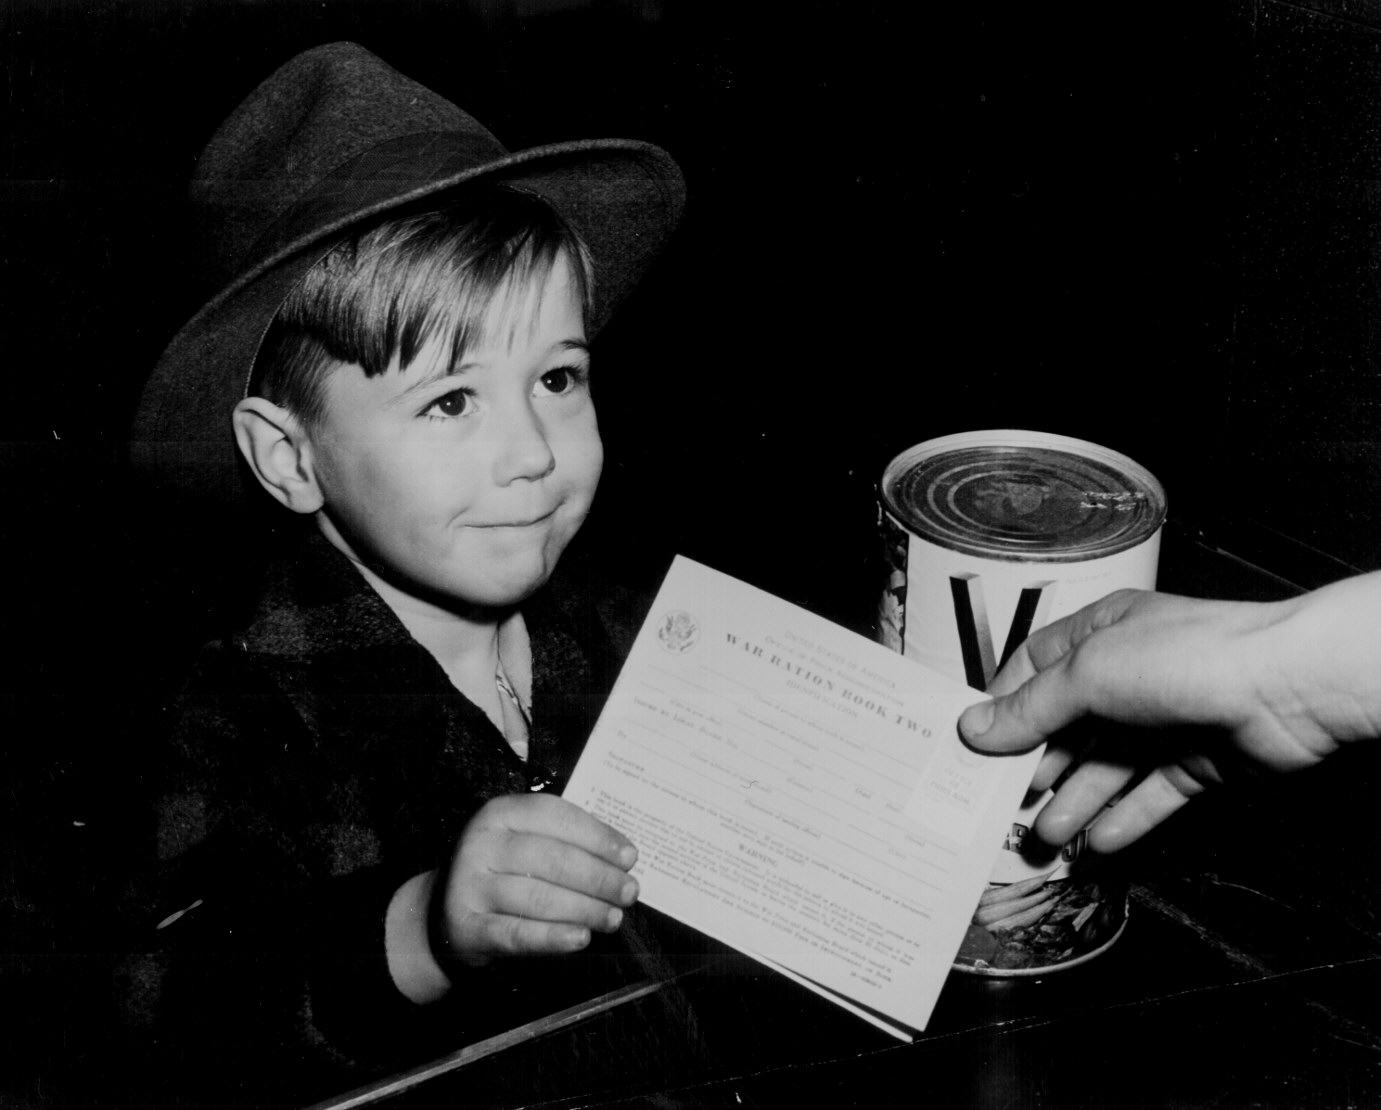 With many parents engaged in war work, children are being taught the facts of point rationing for helping out in family marketing. February 1943. View full size.